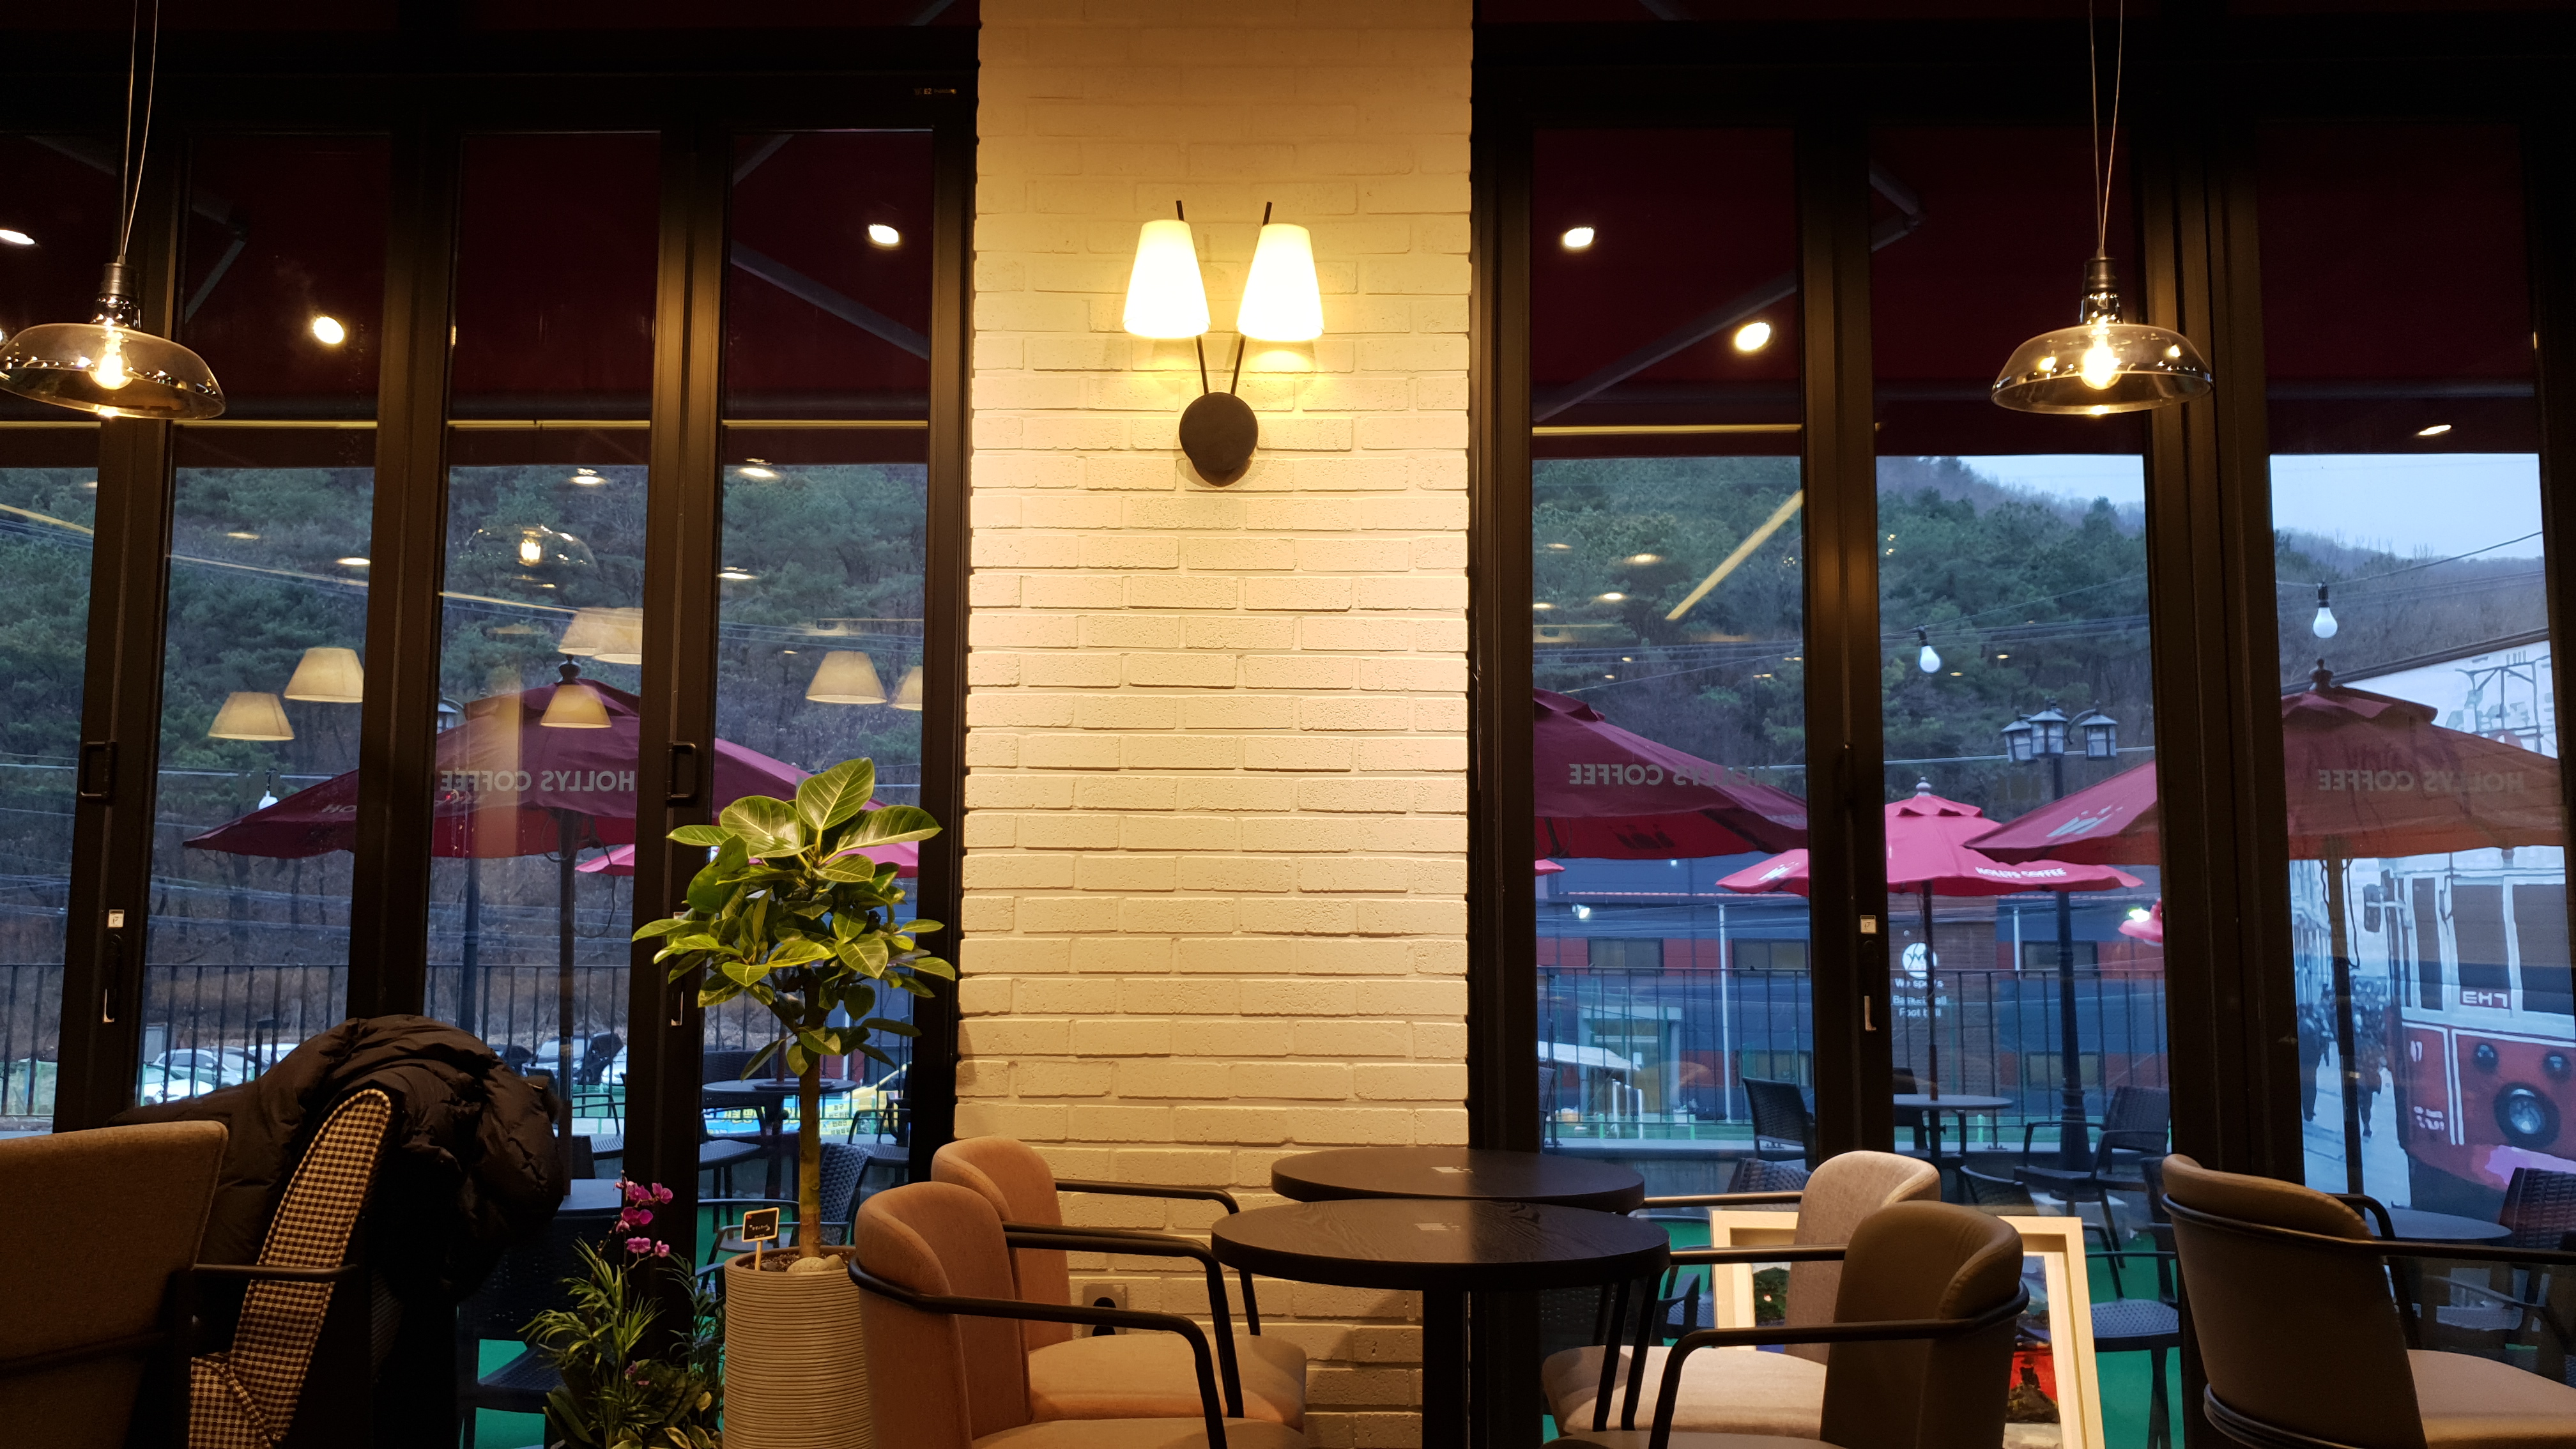 Free Image, cafe, lighting, cozy, out the window, bright, restaurant, building, room, interior design, coffeehouse, table, architecture, night, furniture, home, cafeteria, glass, house, business 4032x2268